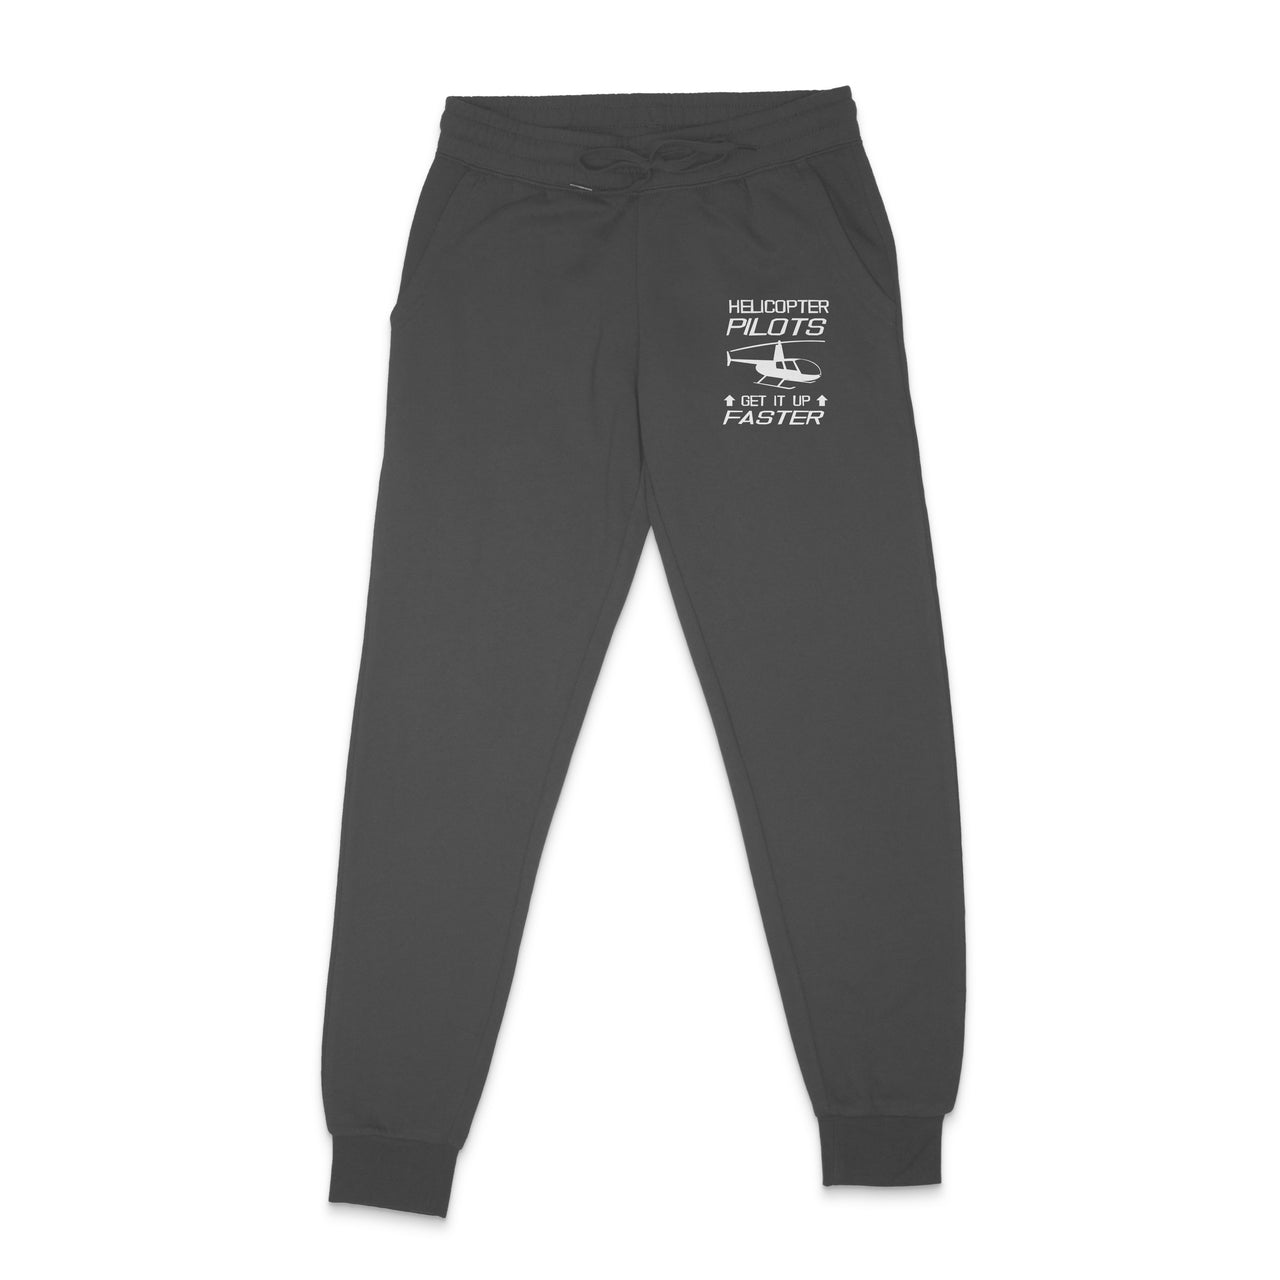 Helicopter Pilots Get It Up Faster Designed Sweatpants